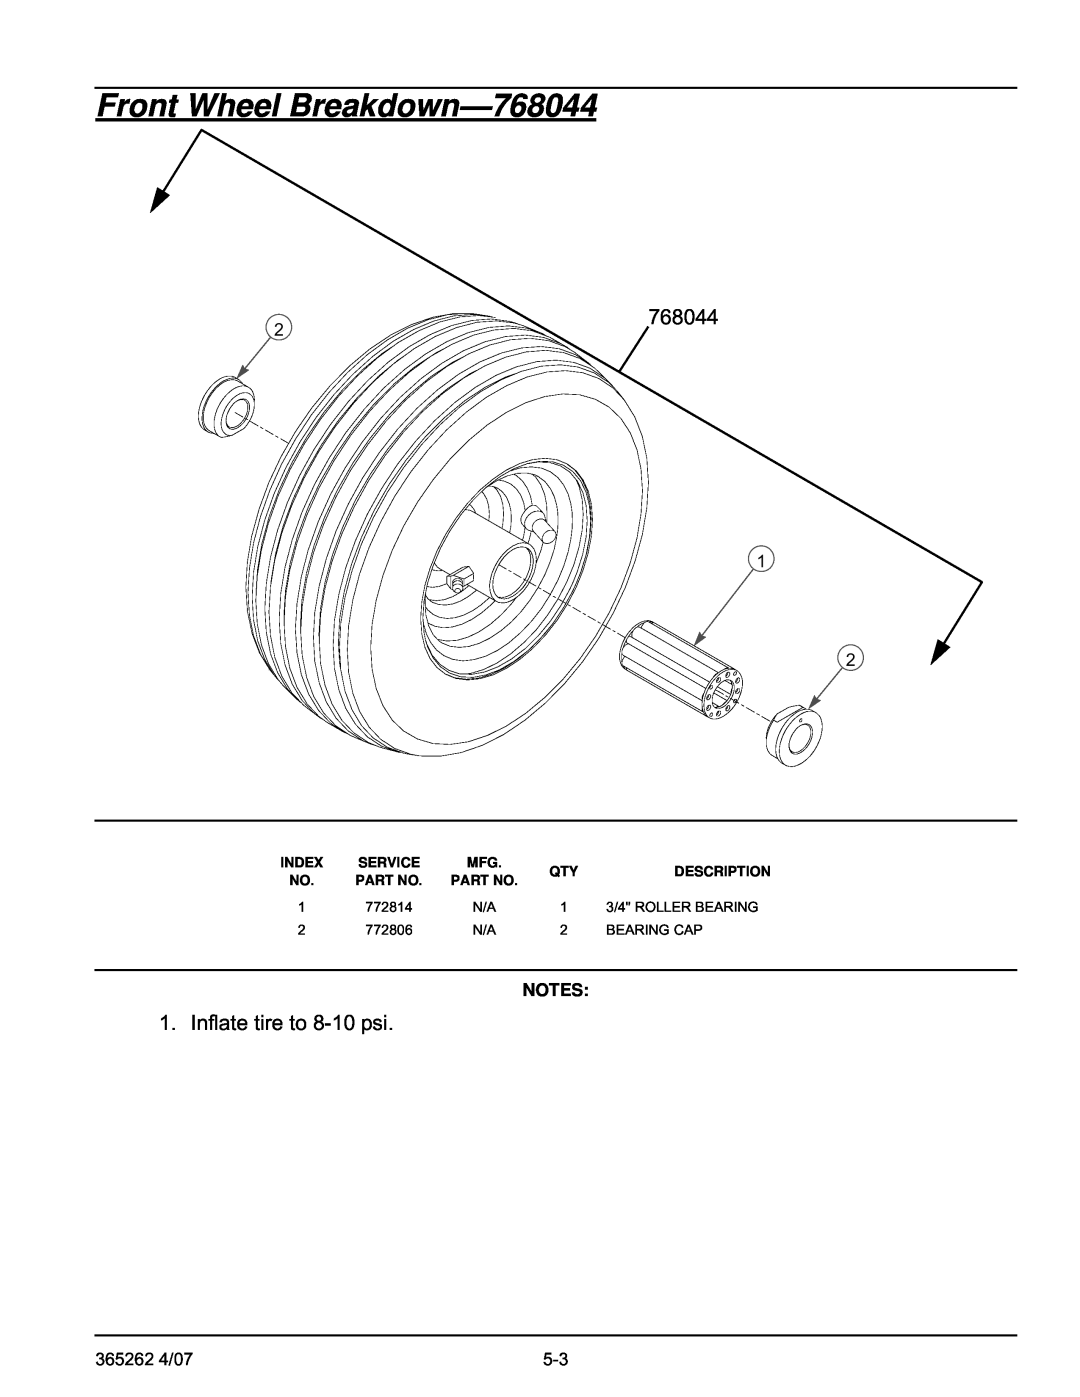 Hustler Turf Lawn Mower manual Front Wheel Breakdown-768044, Inflate tire to 8-10 psi, Index, Service, Description 